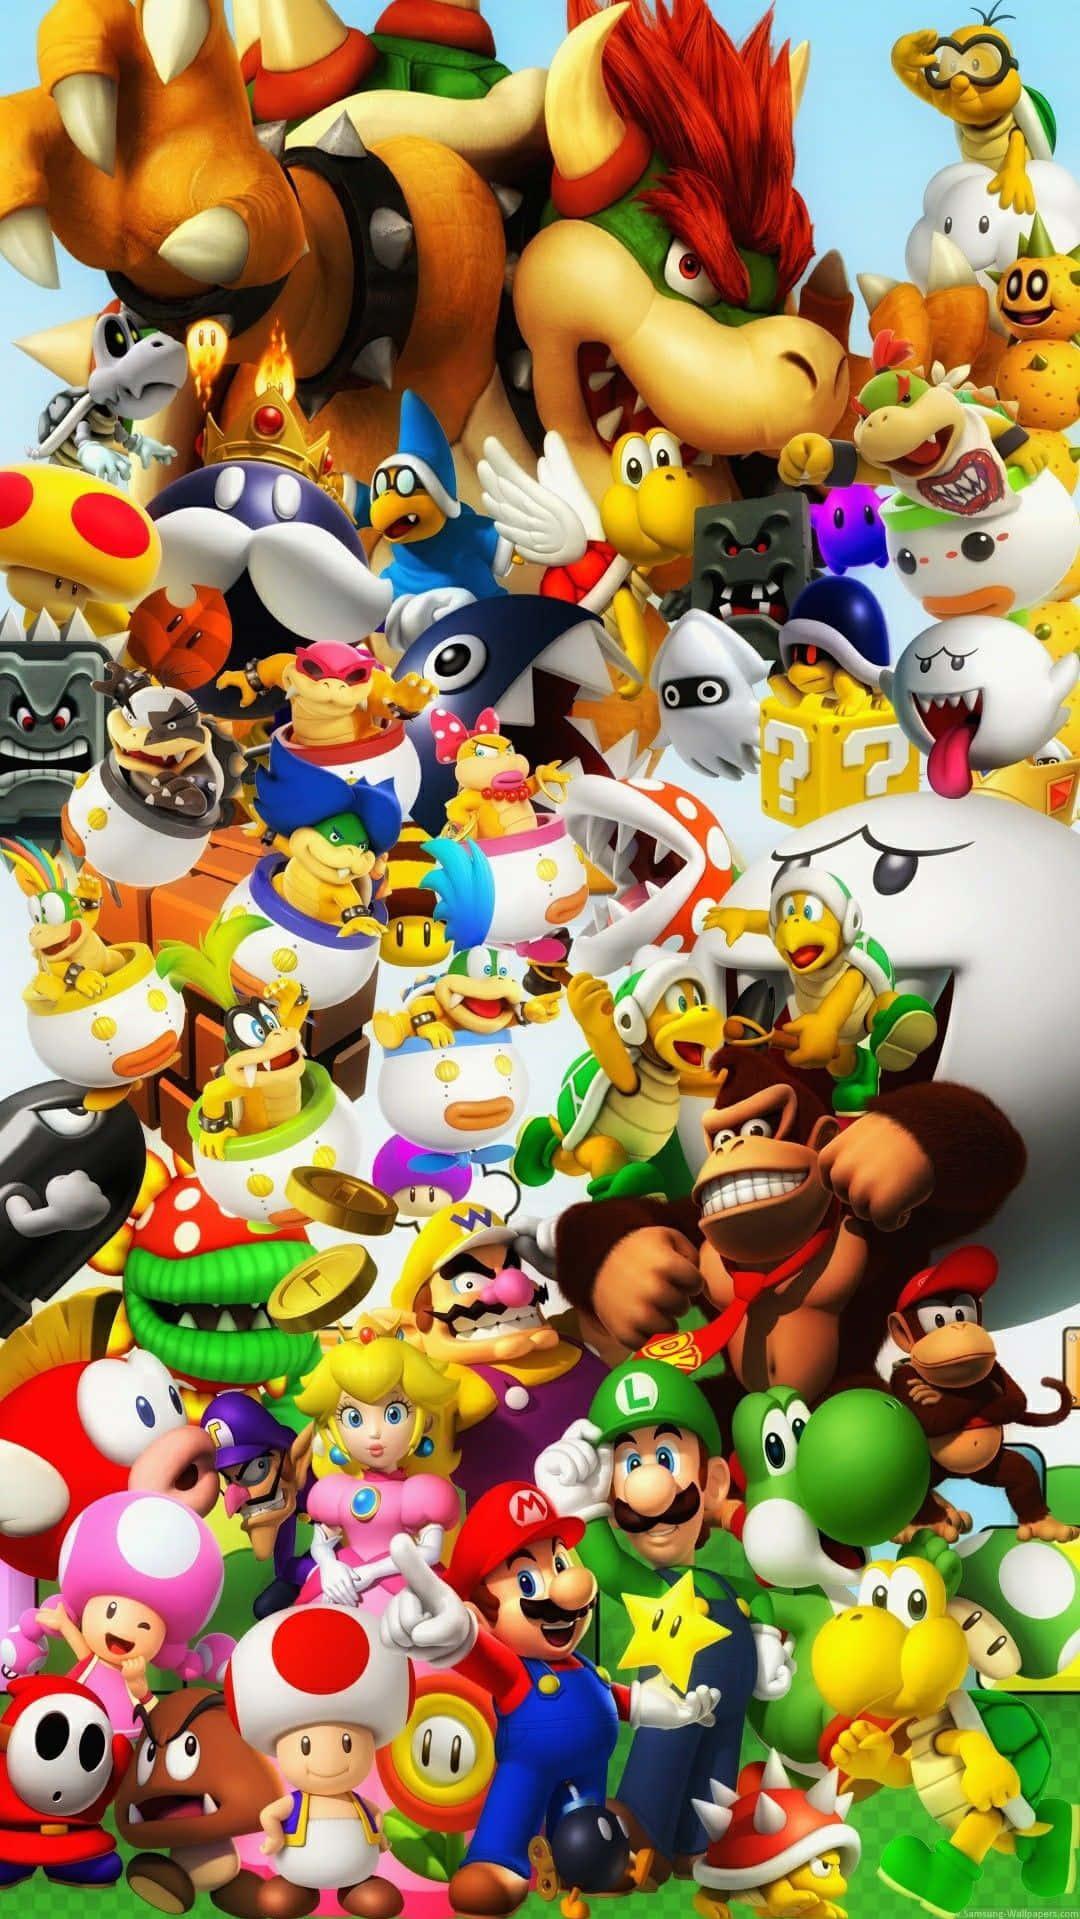 Download All Characters From Super Mario Iphone Wallpaper